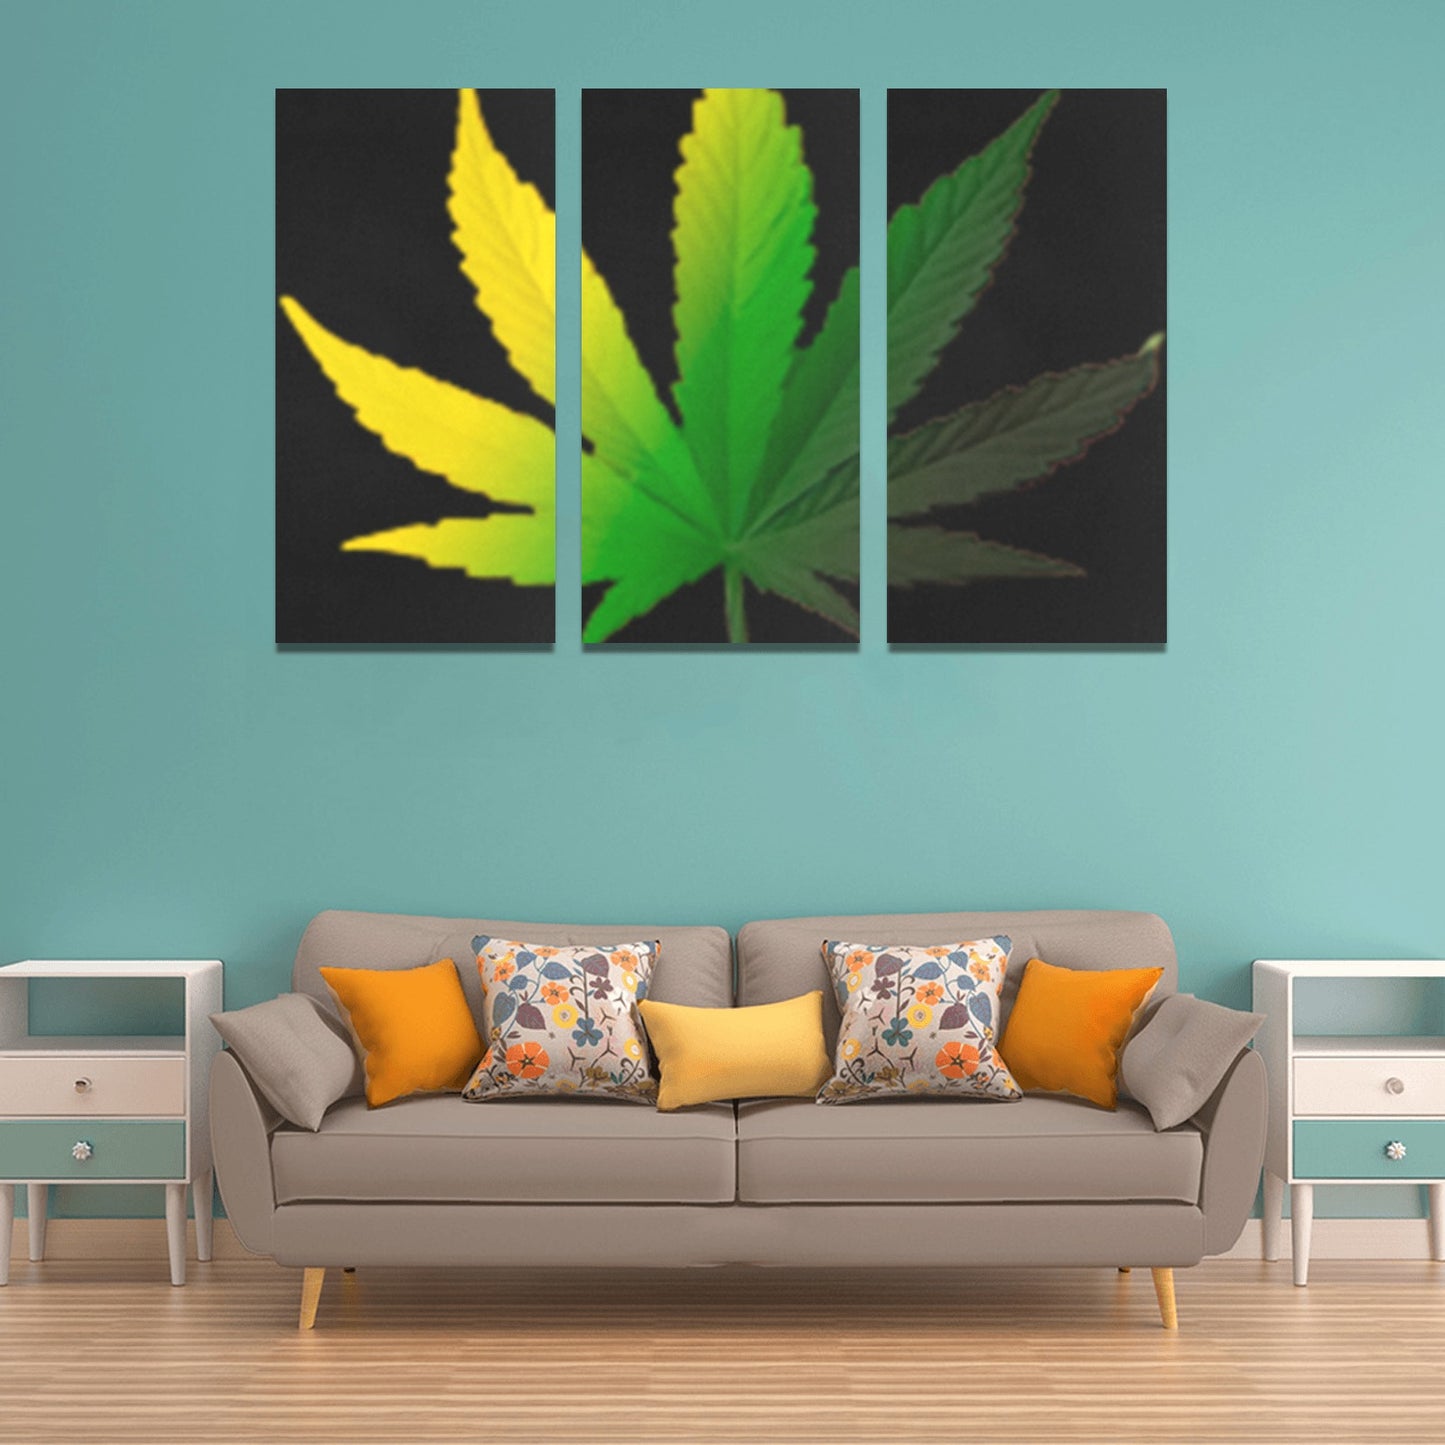 fz design collection too one size / fz the leaf framed canvas art prints set x (3 pieces) (made in usa)